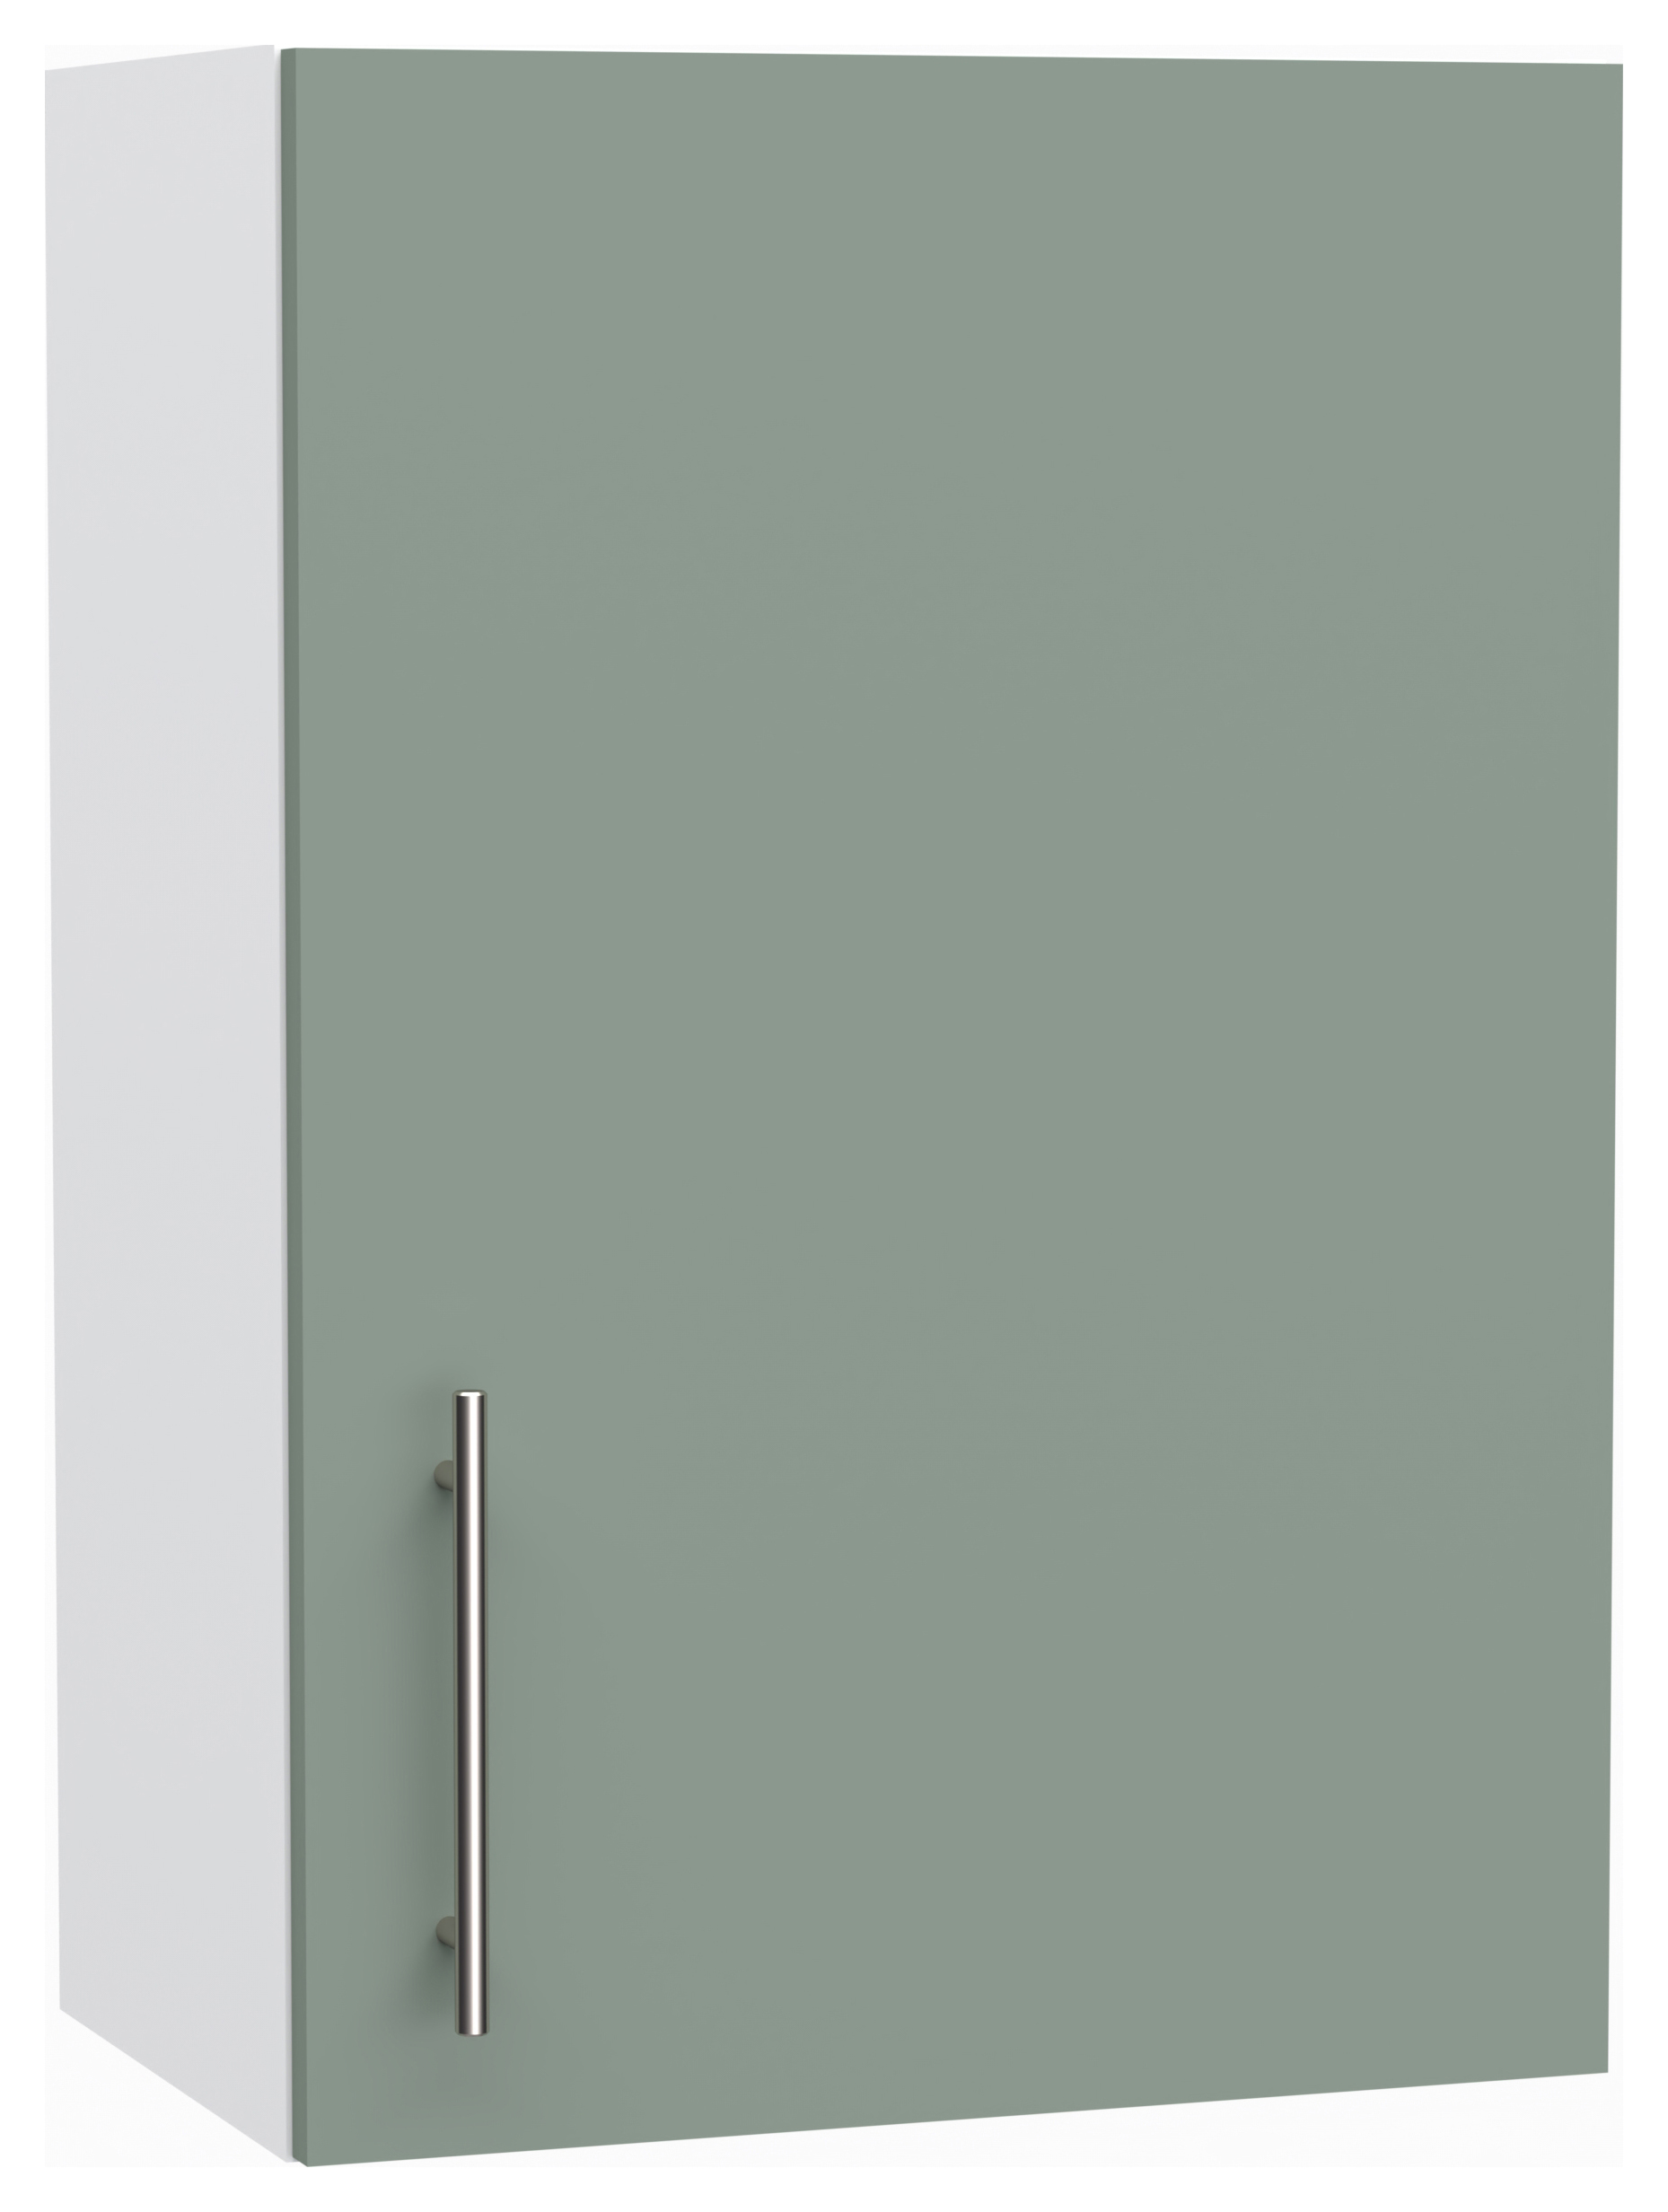 Image of Wickes Orlando Reed Green Wall Unit - 500mm